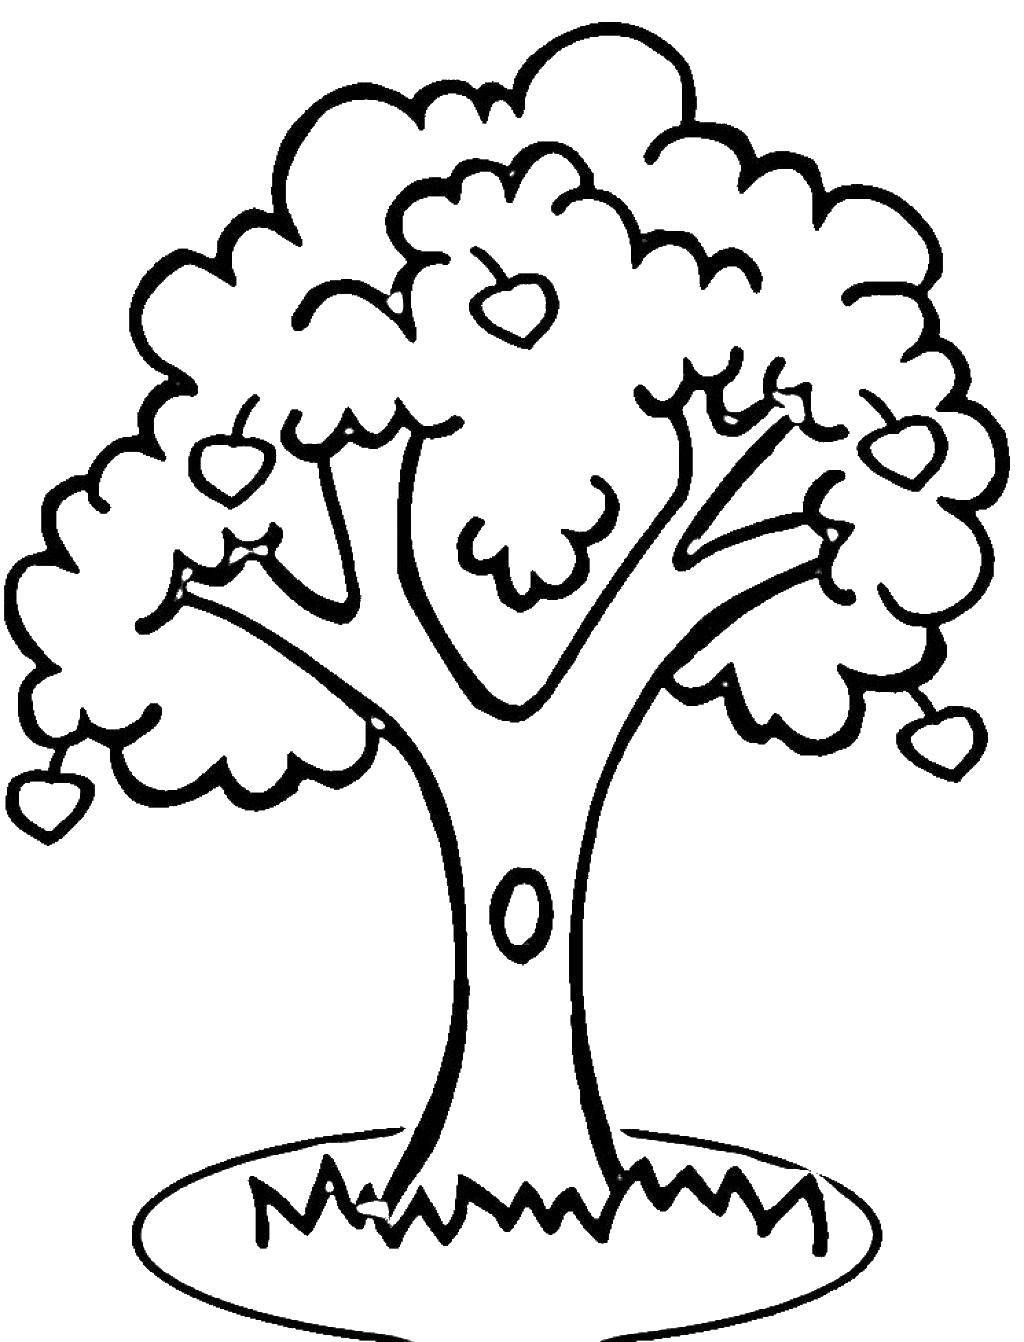 Coloring A tree with a hollow. Category The contour of the tree. Tags:  tree.